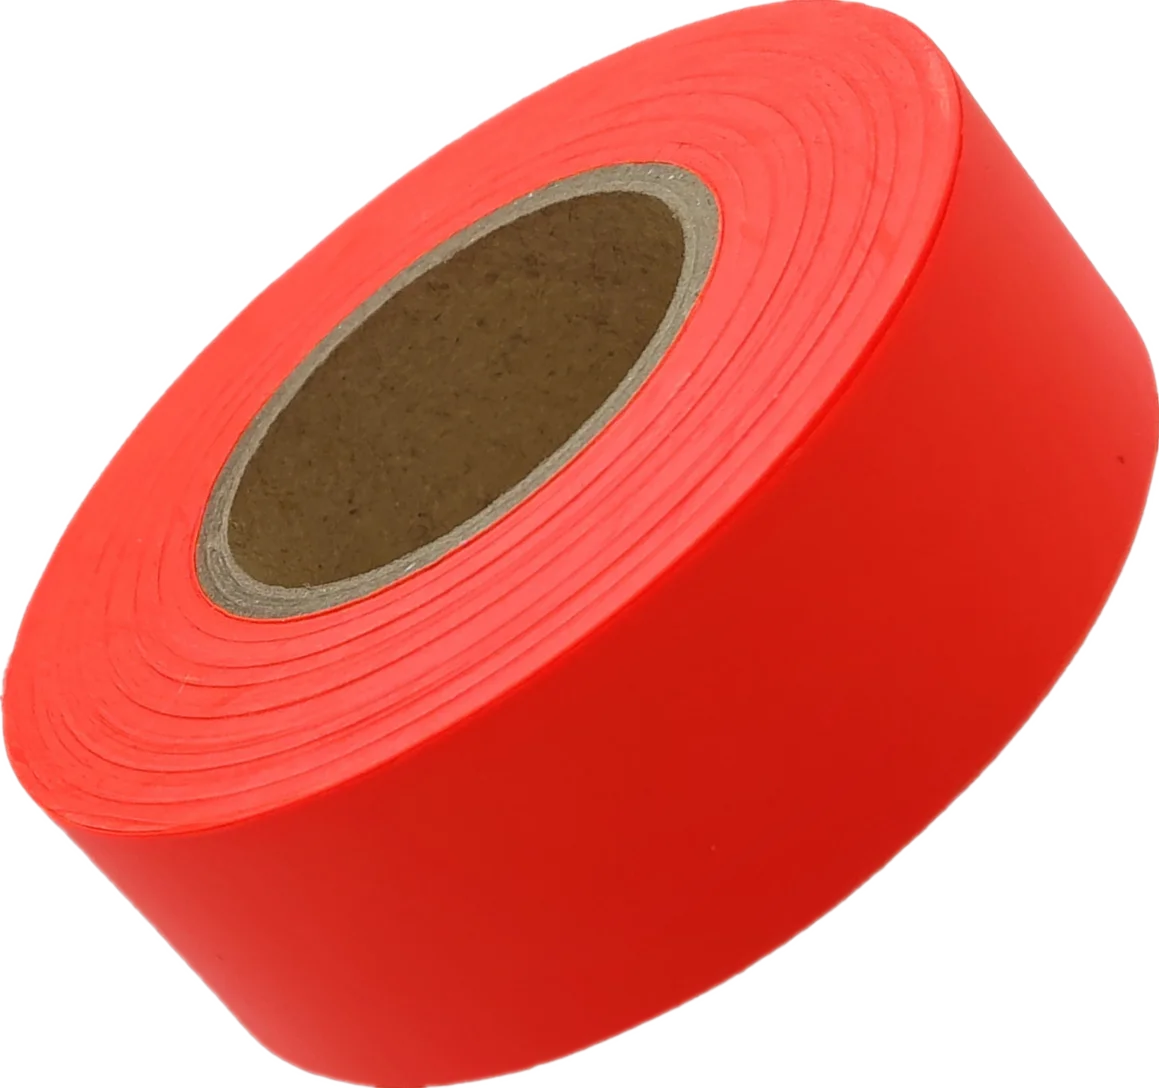 

12 PACK Non-Adhesive Flagging Marker Tape Roll for Tree Marking